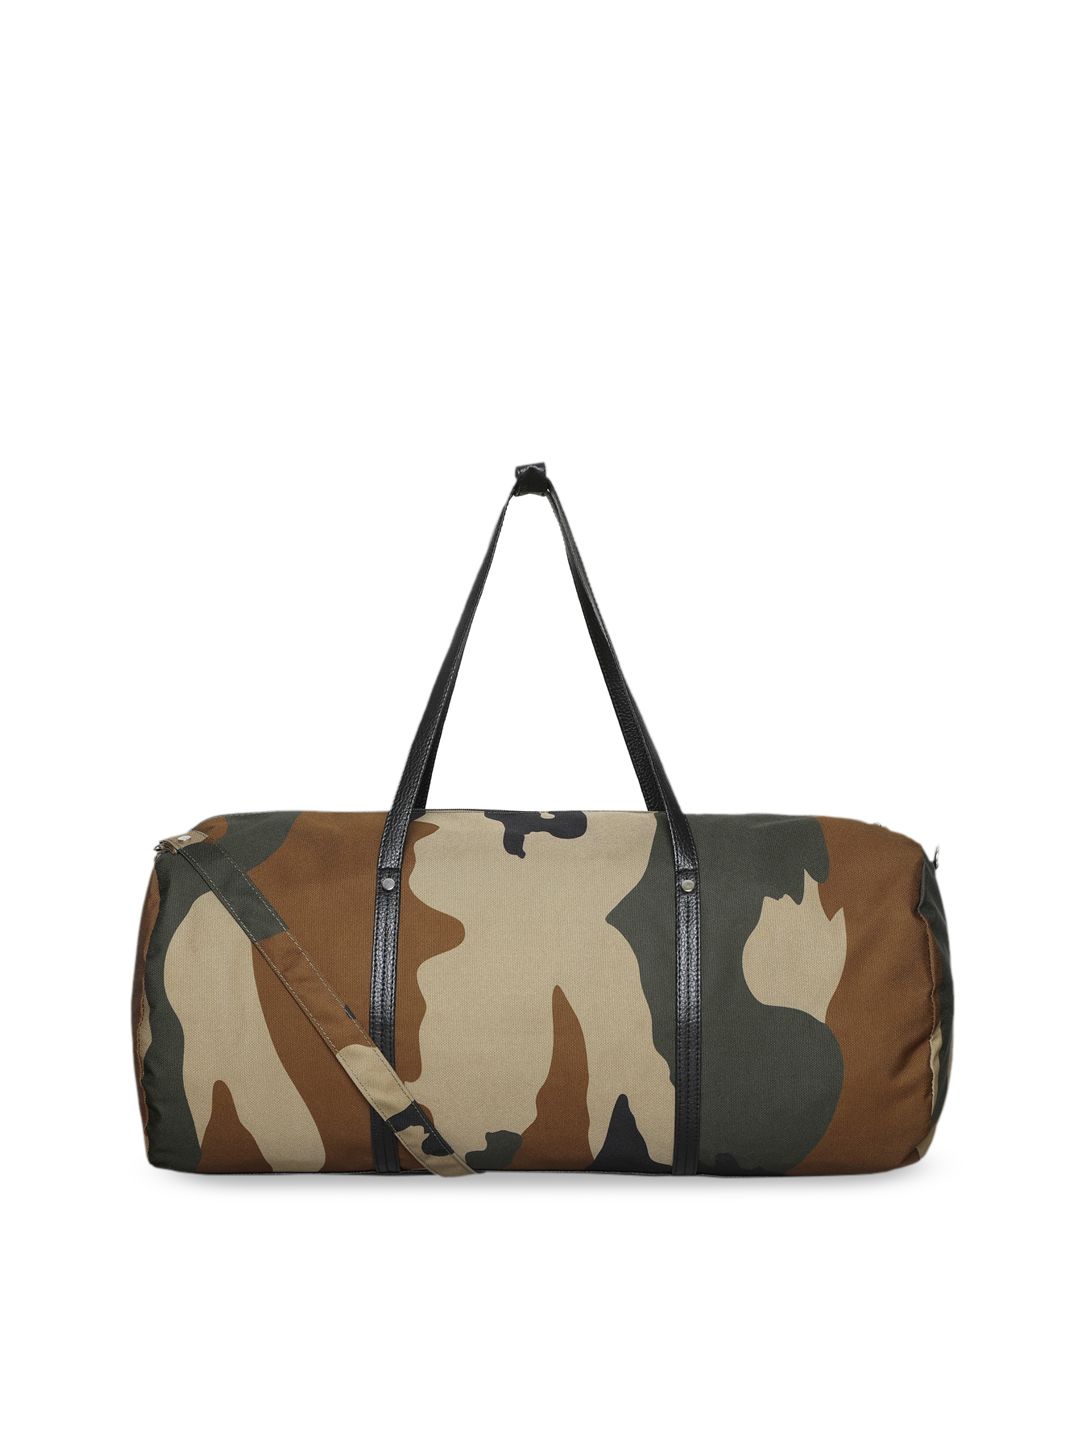 Toteteca Olive-Green & Beige Camouflage Printed Gym Duffel Bag Price in India